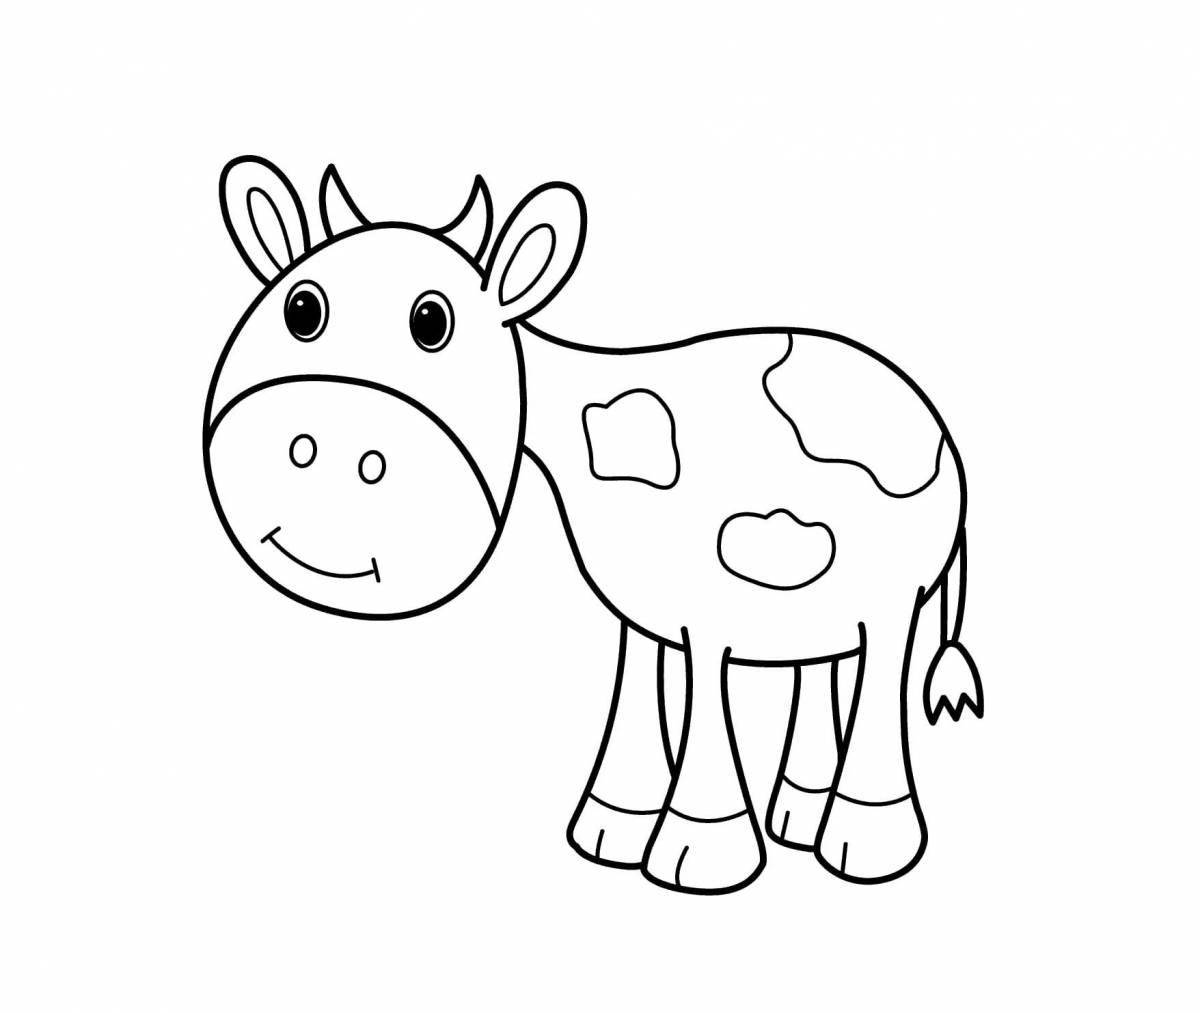 Flourishing coloring cow for toddlers 2 3 years old